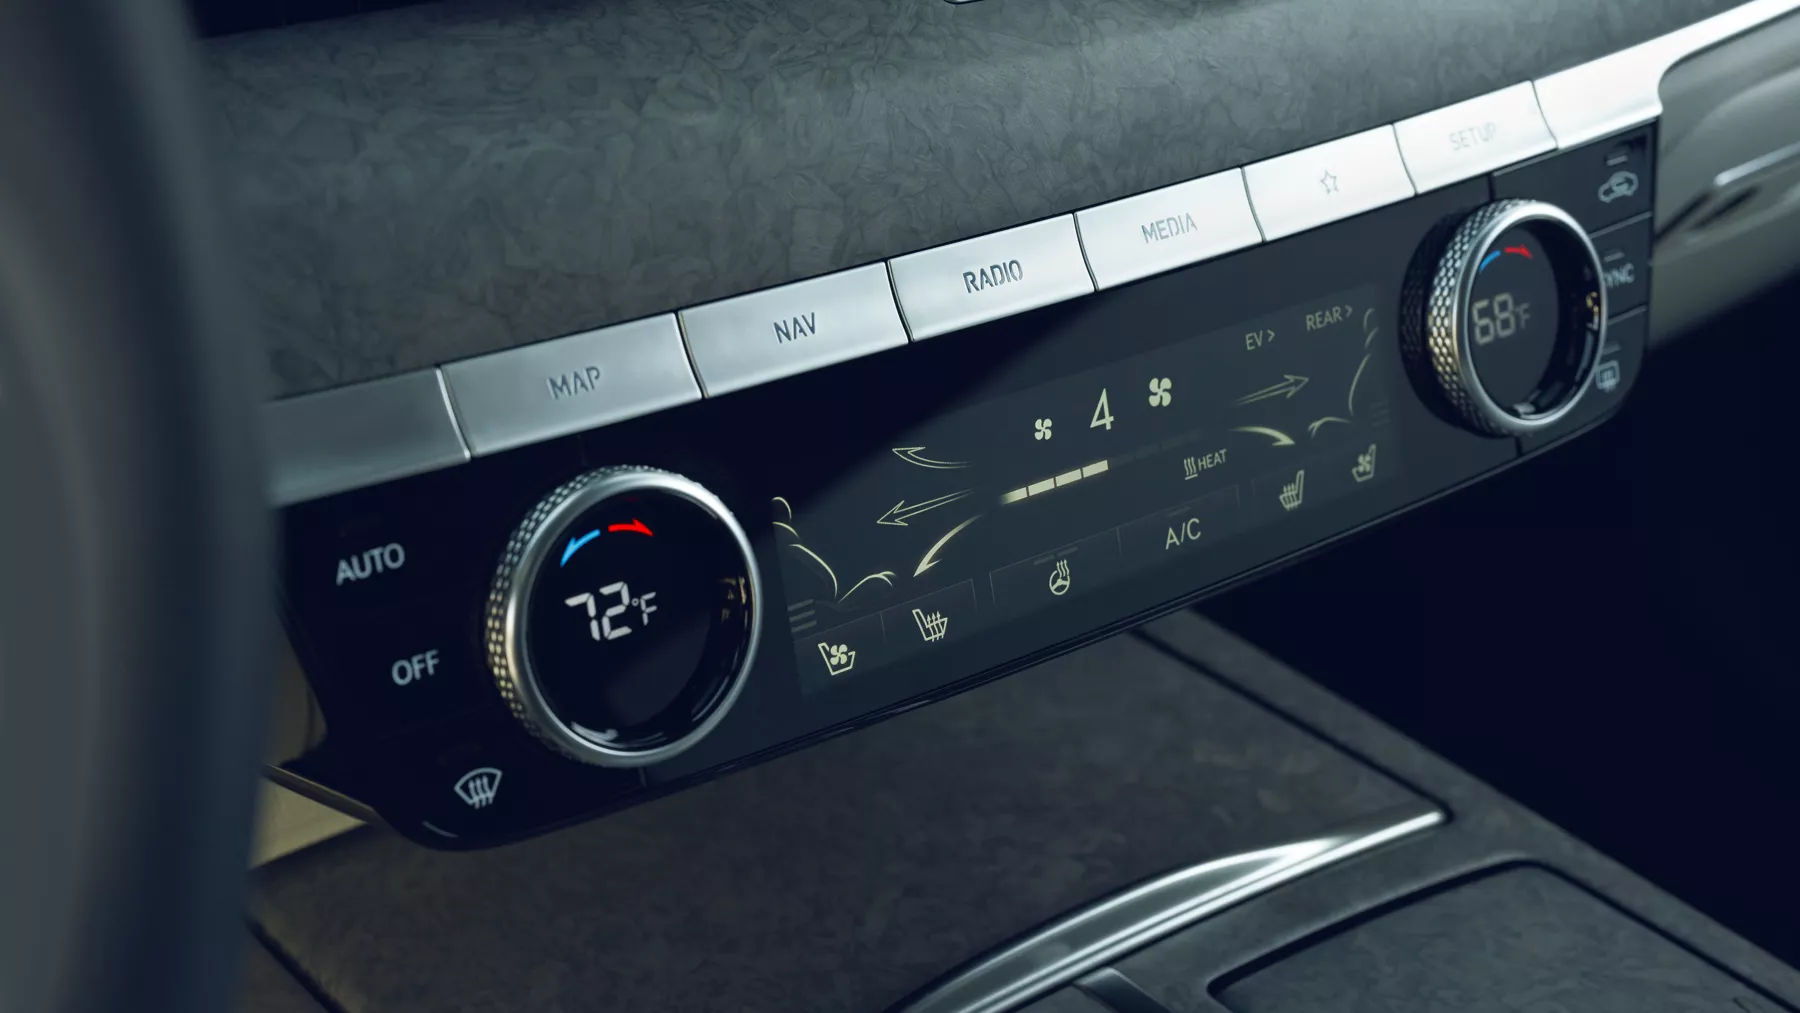 Electrified G80 air conditioning and heating controls.